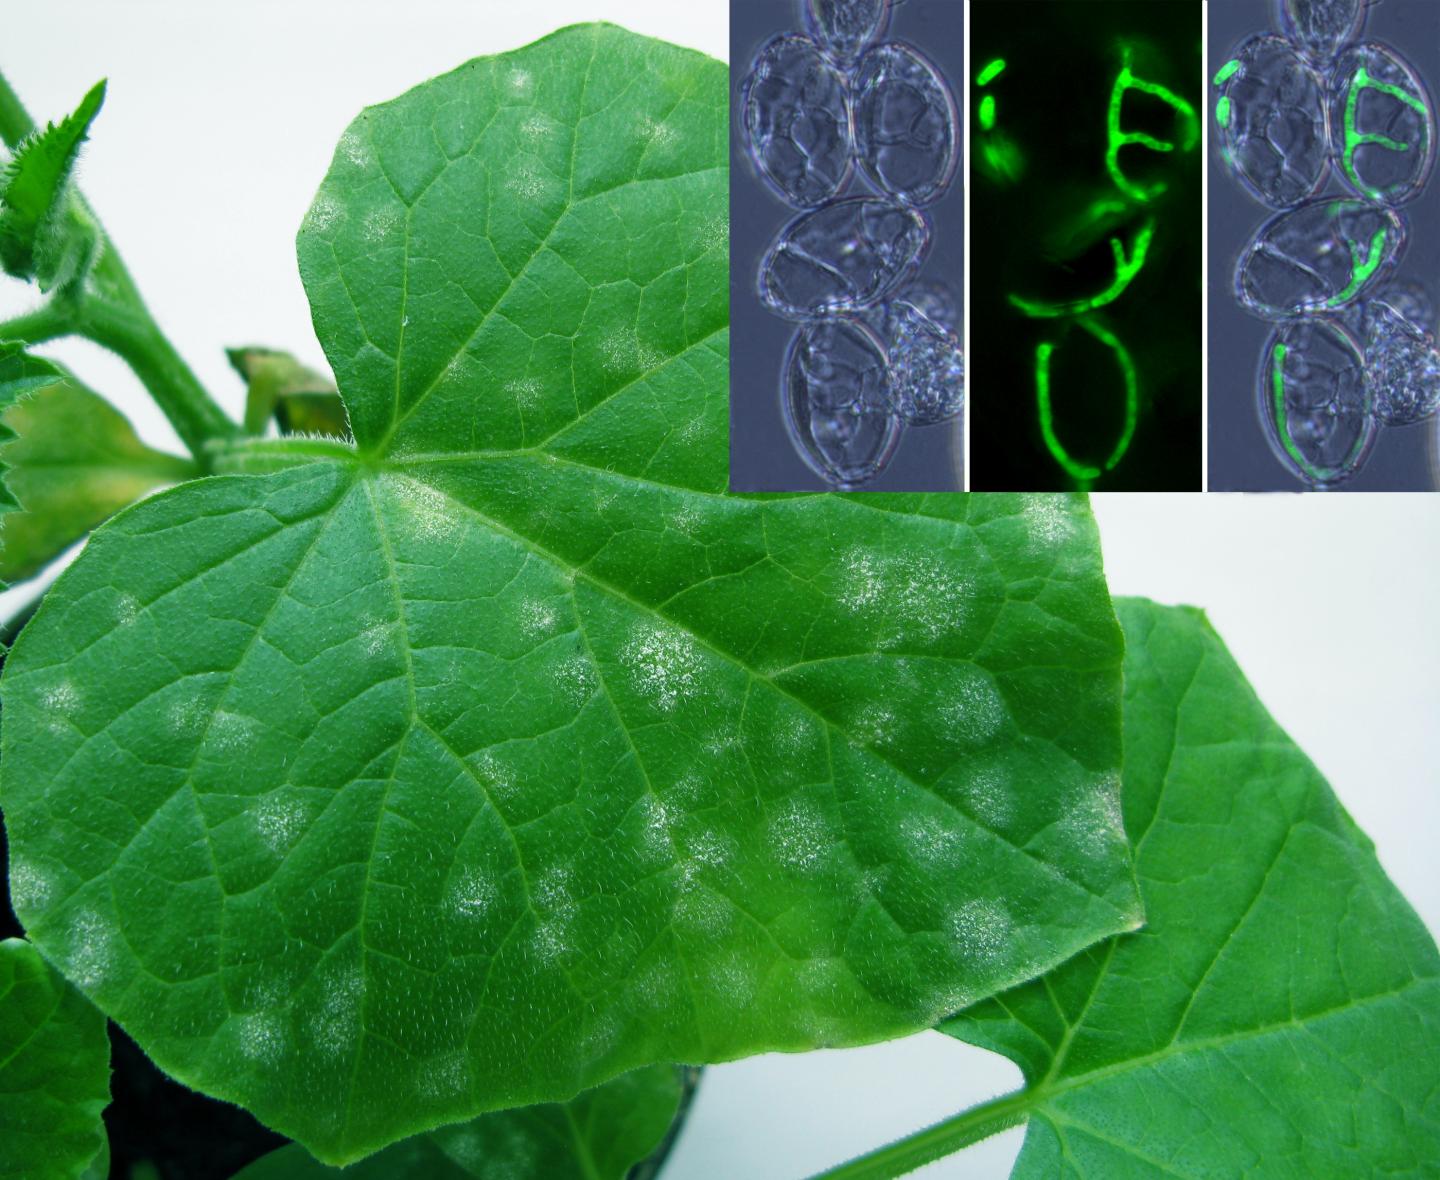 Cucumber Leaves Infected with Powdery Mildew